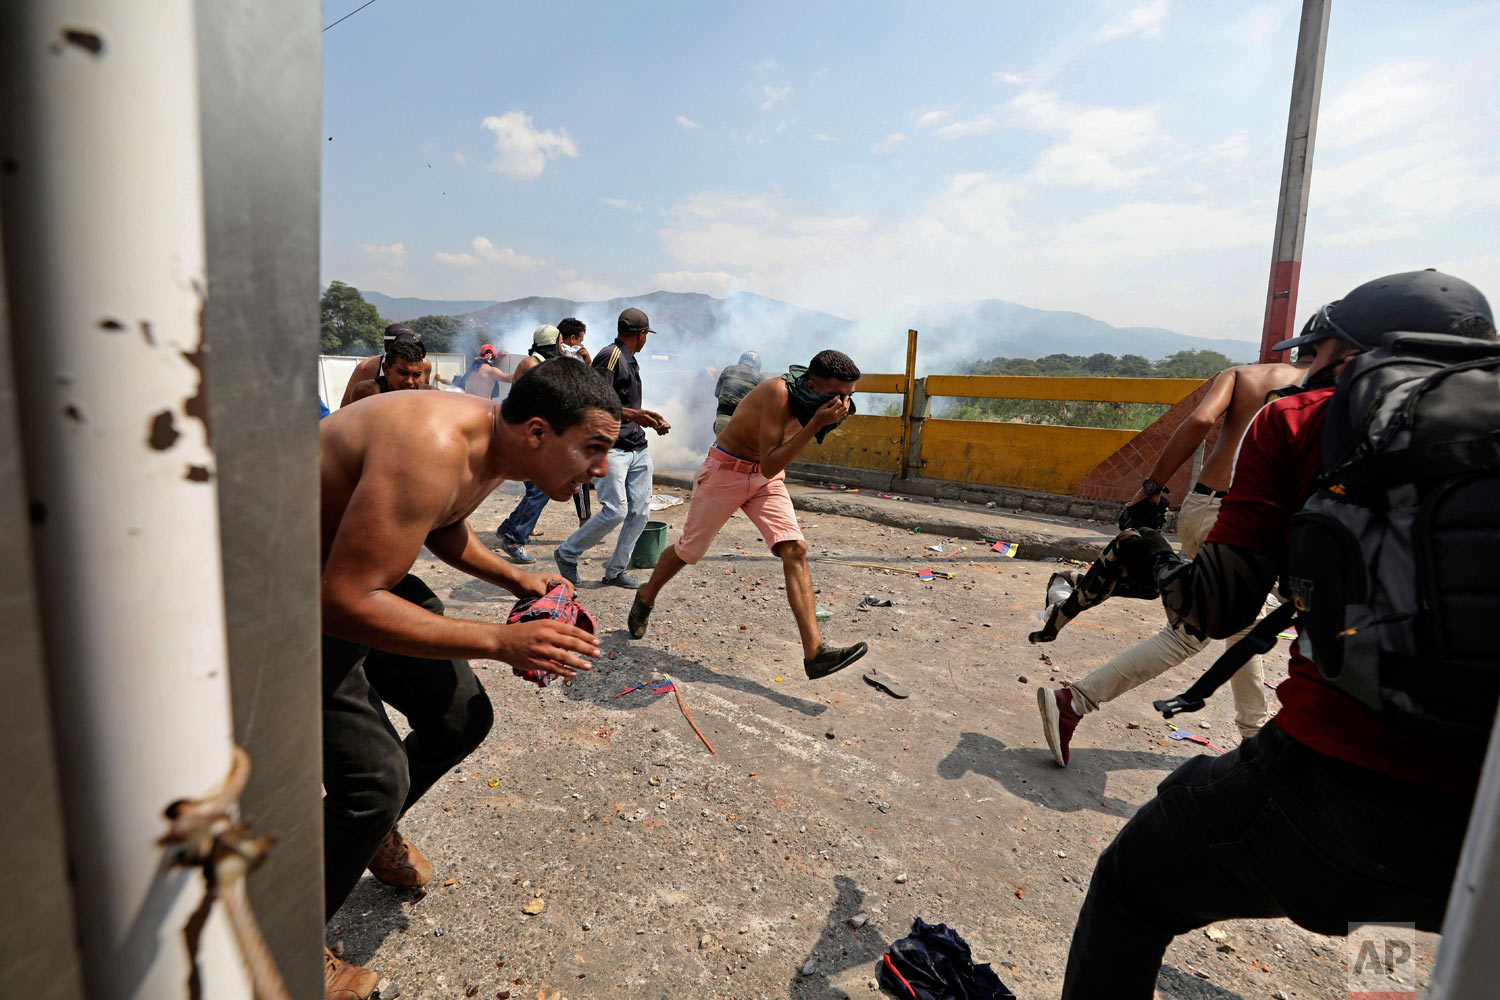  People run for cover from tear gas launched by Venezuela's National Guard as they try to clear the barricaded Simon Bolivar international bridge in Cucuta, Colombia, Saturday, Feb. 23, 2019. (AP Photo/Fernando Vergara) 